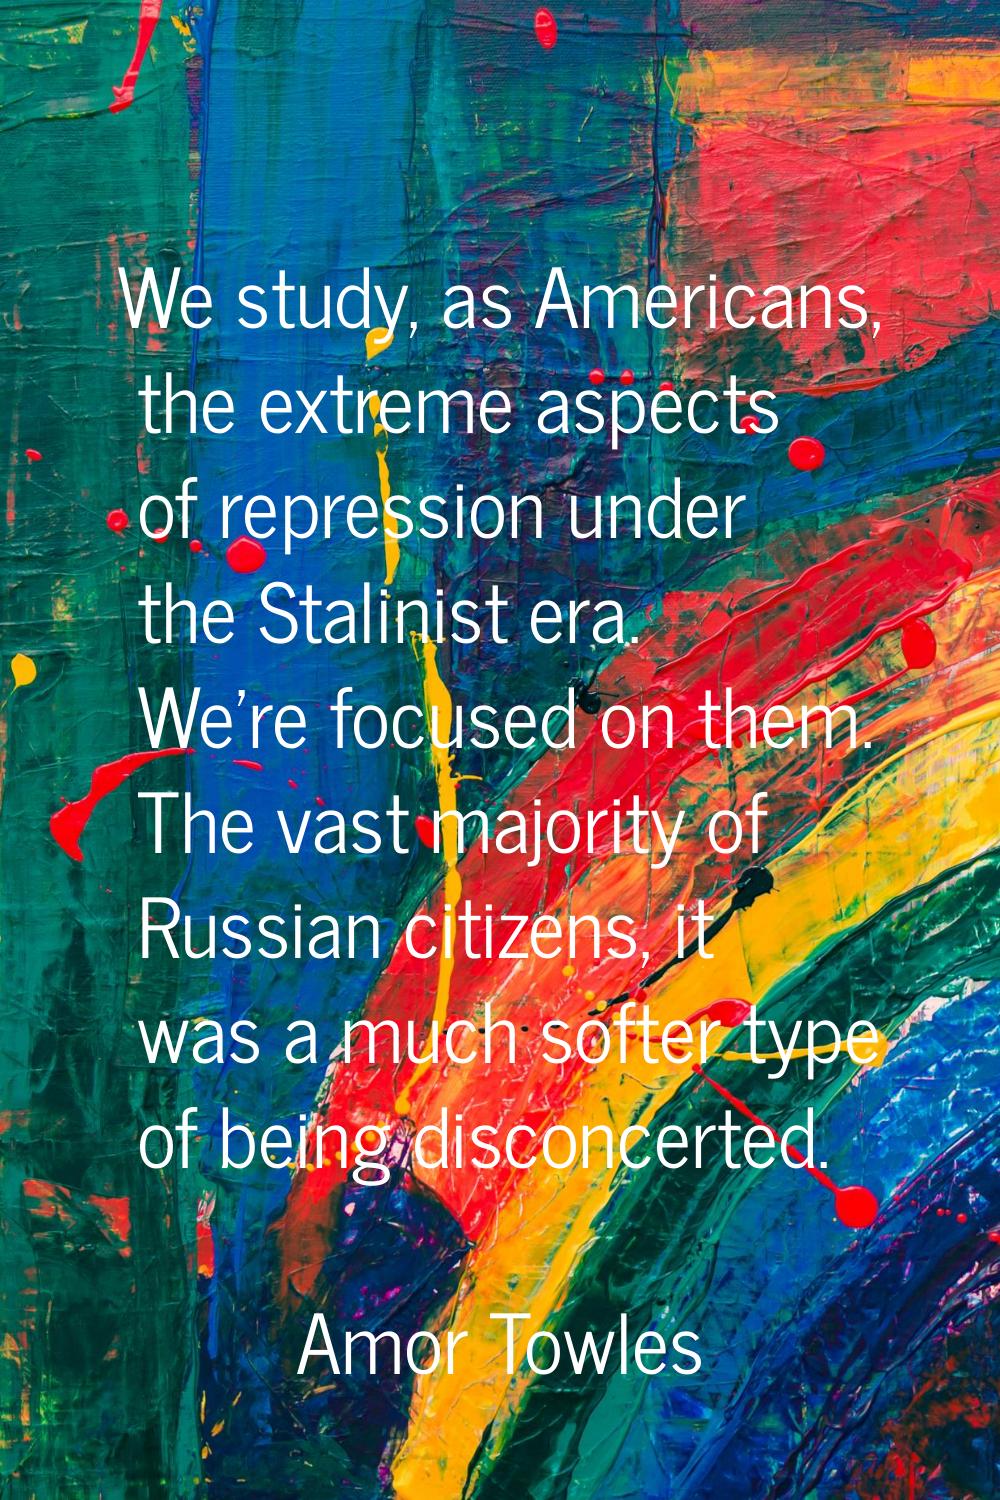 We study, as Americans, the extreme aspects of repression under the Stalinist era. We're focused on